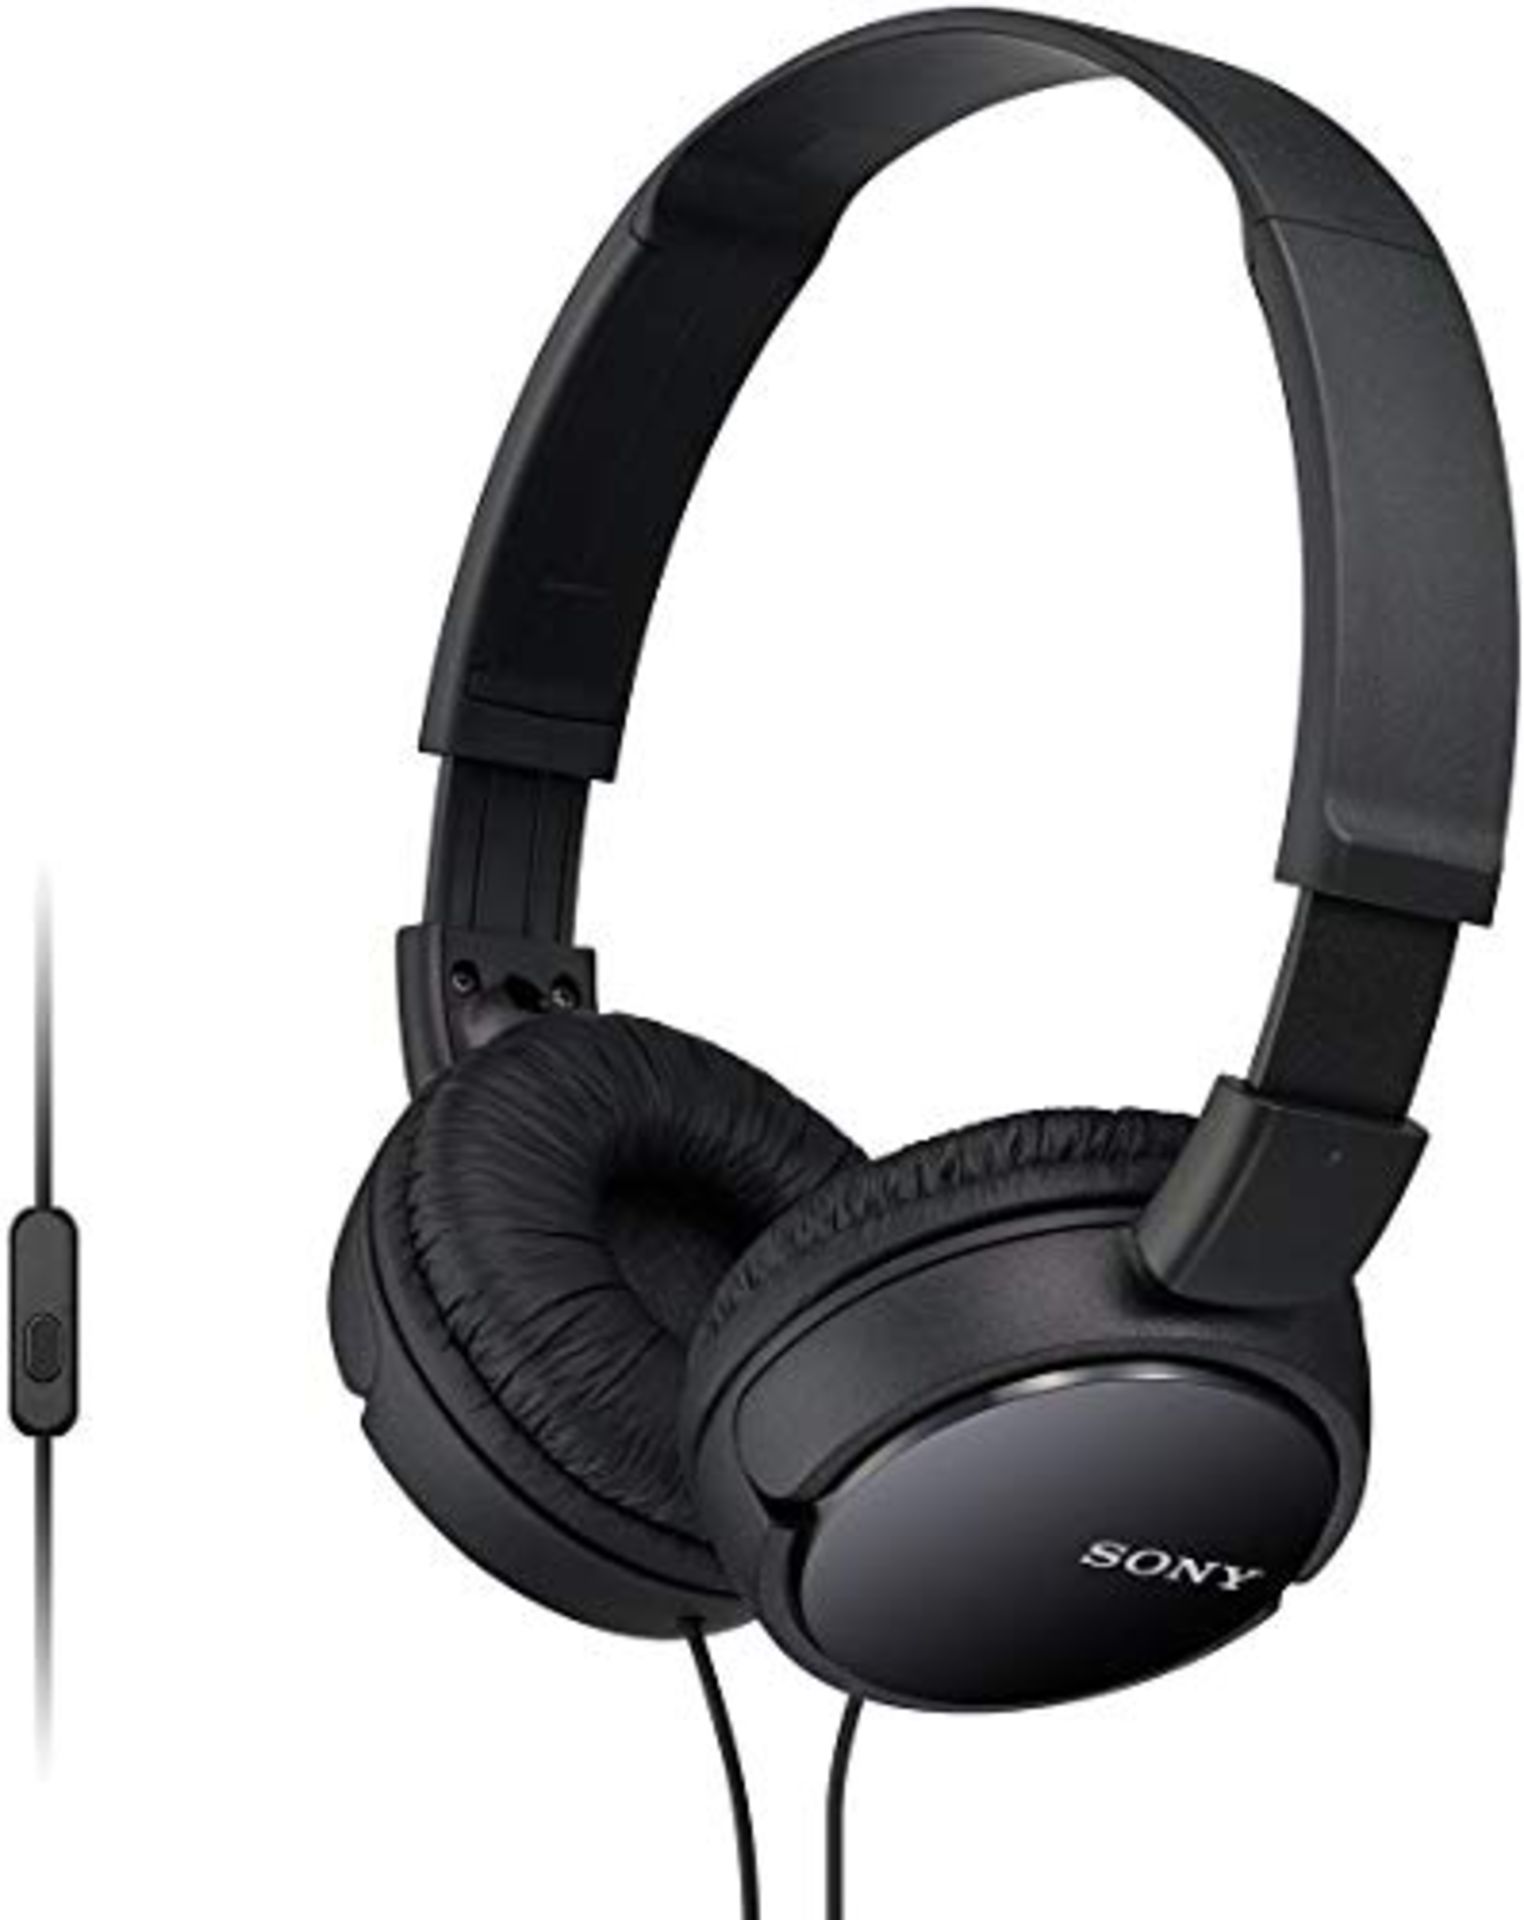 Sony MDR-ZX110AP - On-ear headphones with microphone, Black